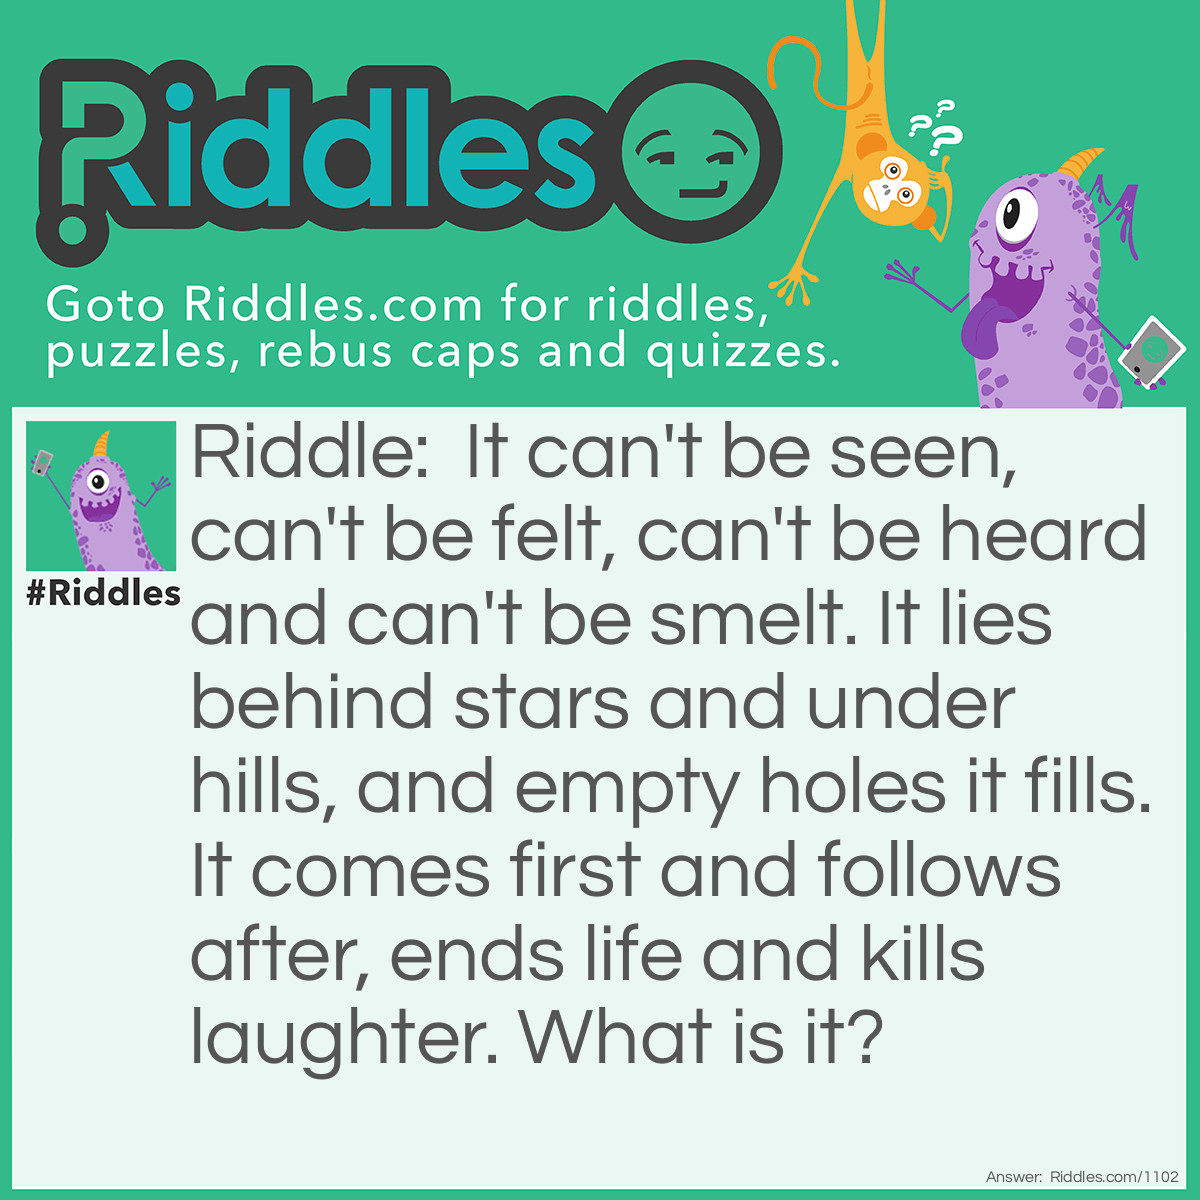 Riddle: It can't be seen, can't be felt, can't be heard, and can't be smelt. It lies behind stars and under hills, And empty holes it fills. It comes first and follows after, Ends life, and kills <a title="laughter" href="What does a toilet with a funny accent have">laughter</a>. What is it? Answer: The dark.